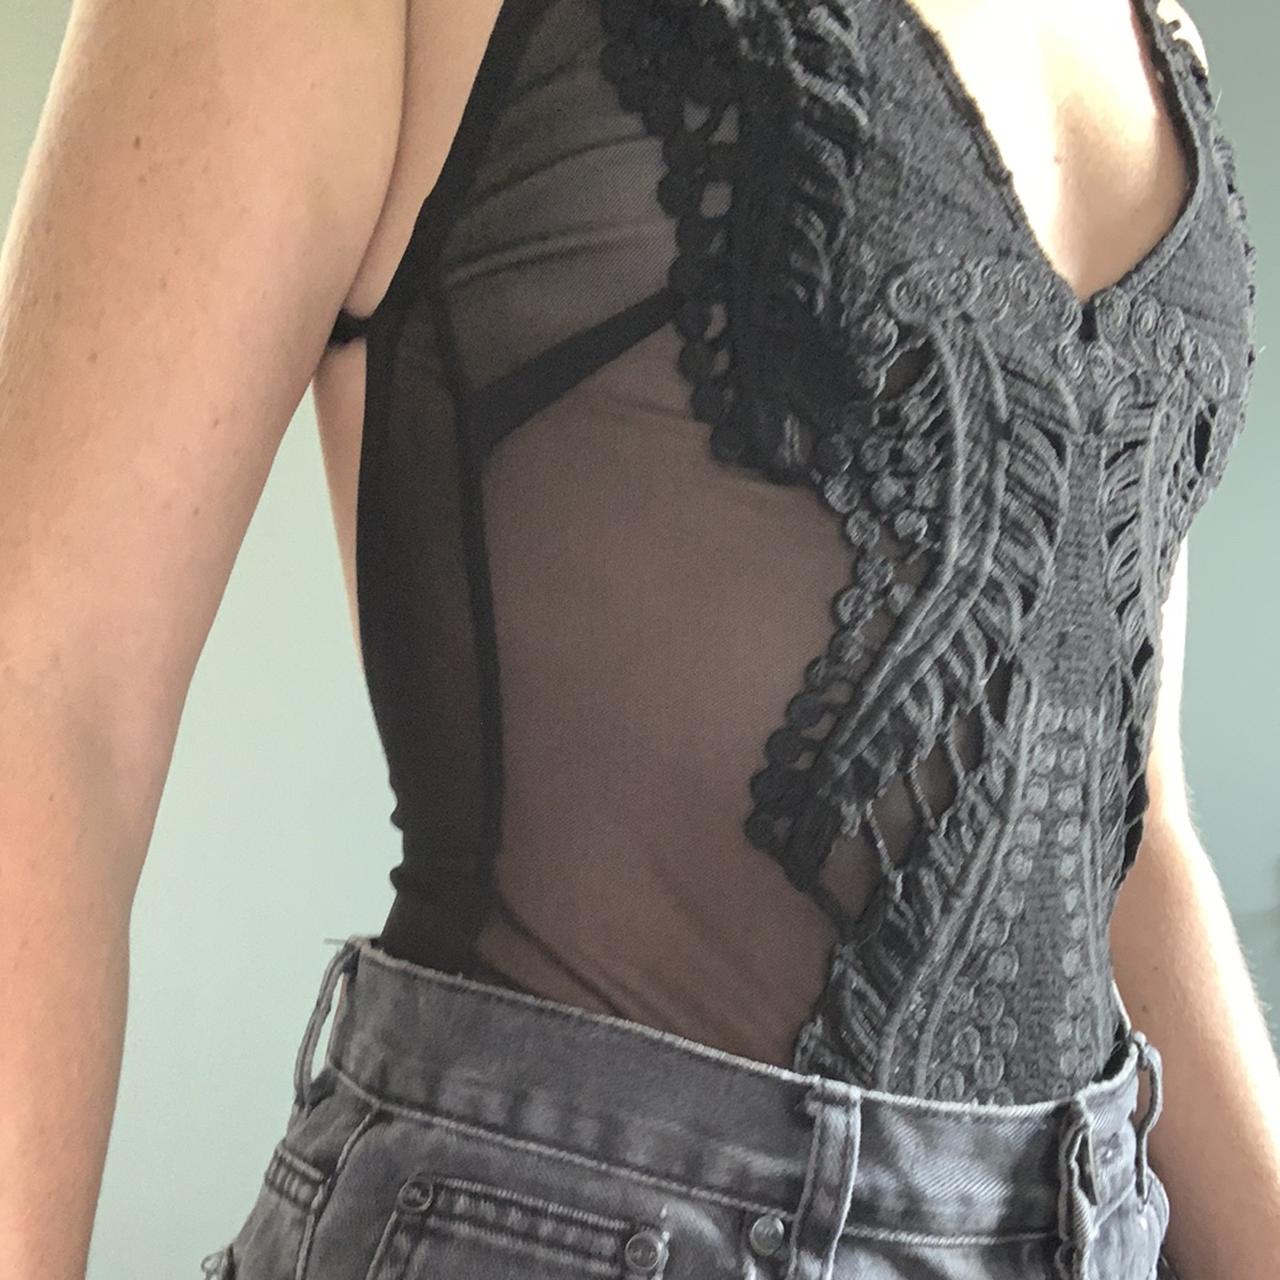 Product Image 3 - Black sexy bodysuit! Size small.